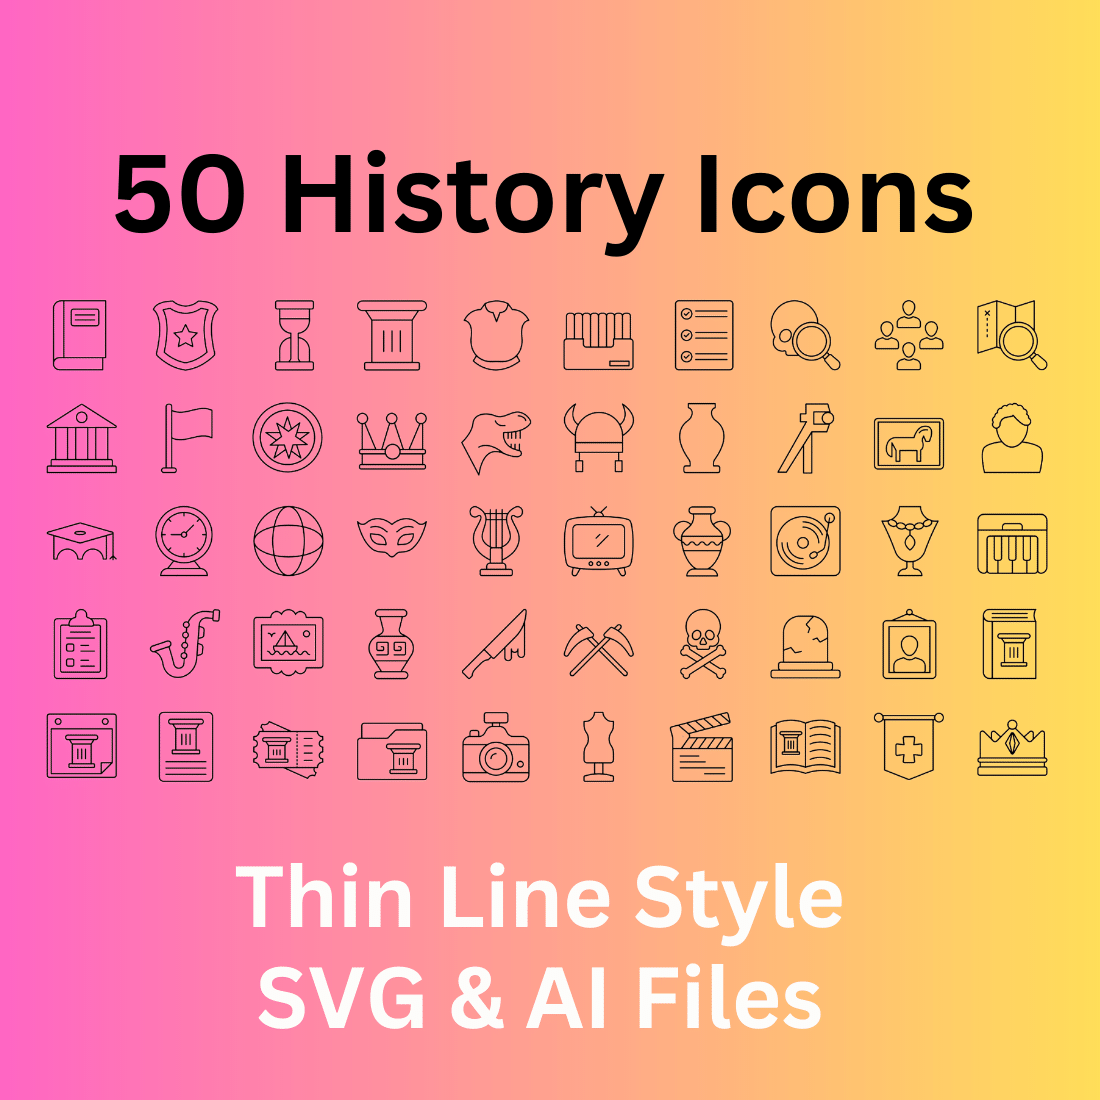 History Icon Set 50 Outline Icons - SVG And AI Files cover image.